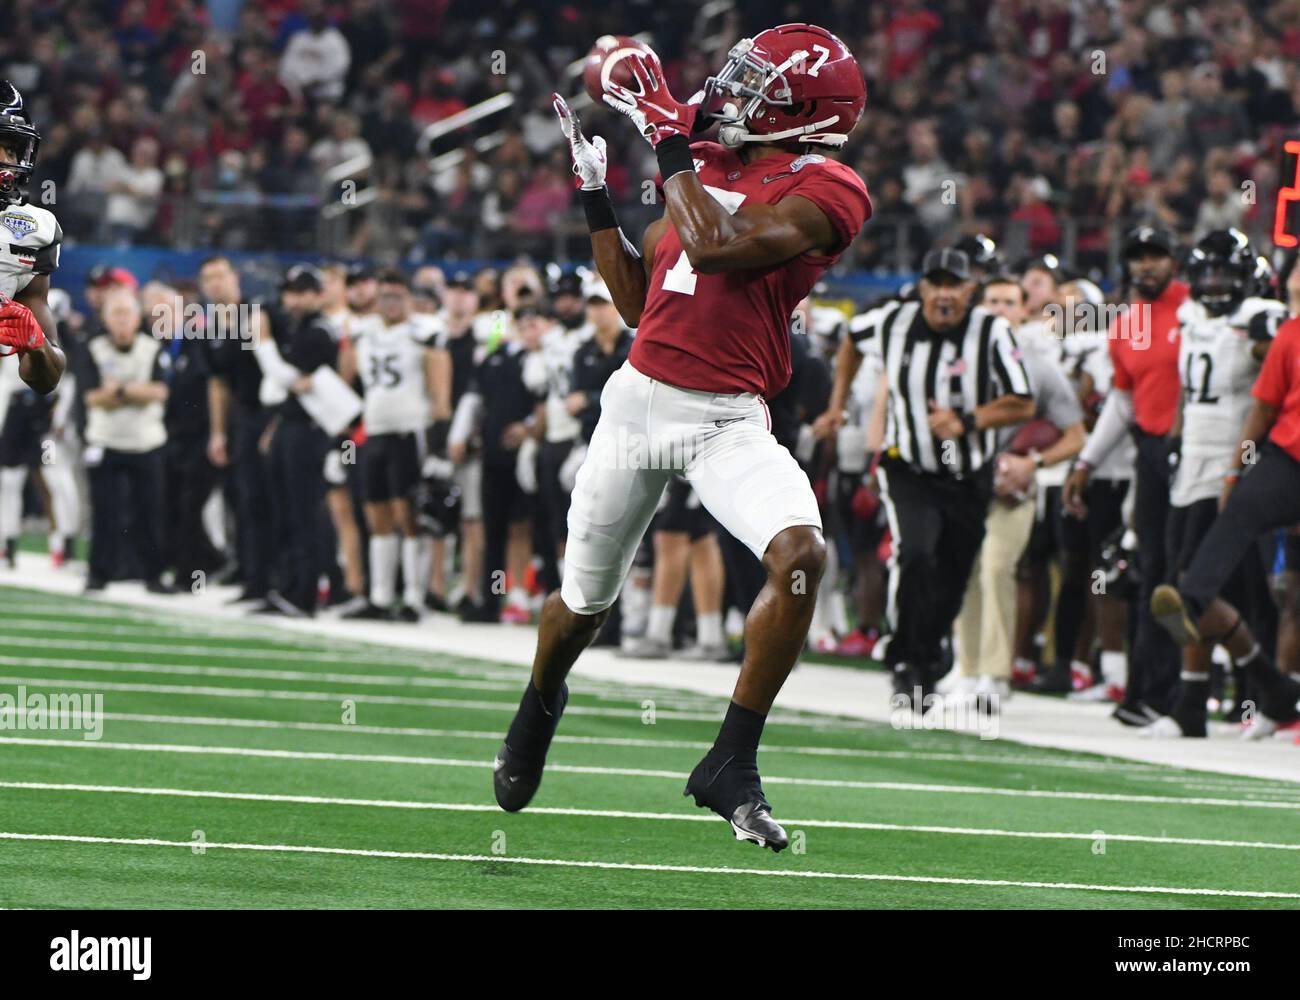 Arlington, USA. 31st Dec, 2021. Alabama's Ja'Corey Brooks catches a 44-yard touchdown against the Cincinnati Bearcats in the 2021 Cotton Bowl Classic, one of the College Football Playoff Semifinal games, on Saturday, December 31, 2021 at AT&T Stadium in Arlington, Texas. Photo by Ian Halperin/UPI Credit: UPI/Alamy Live News Stock Photo